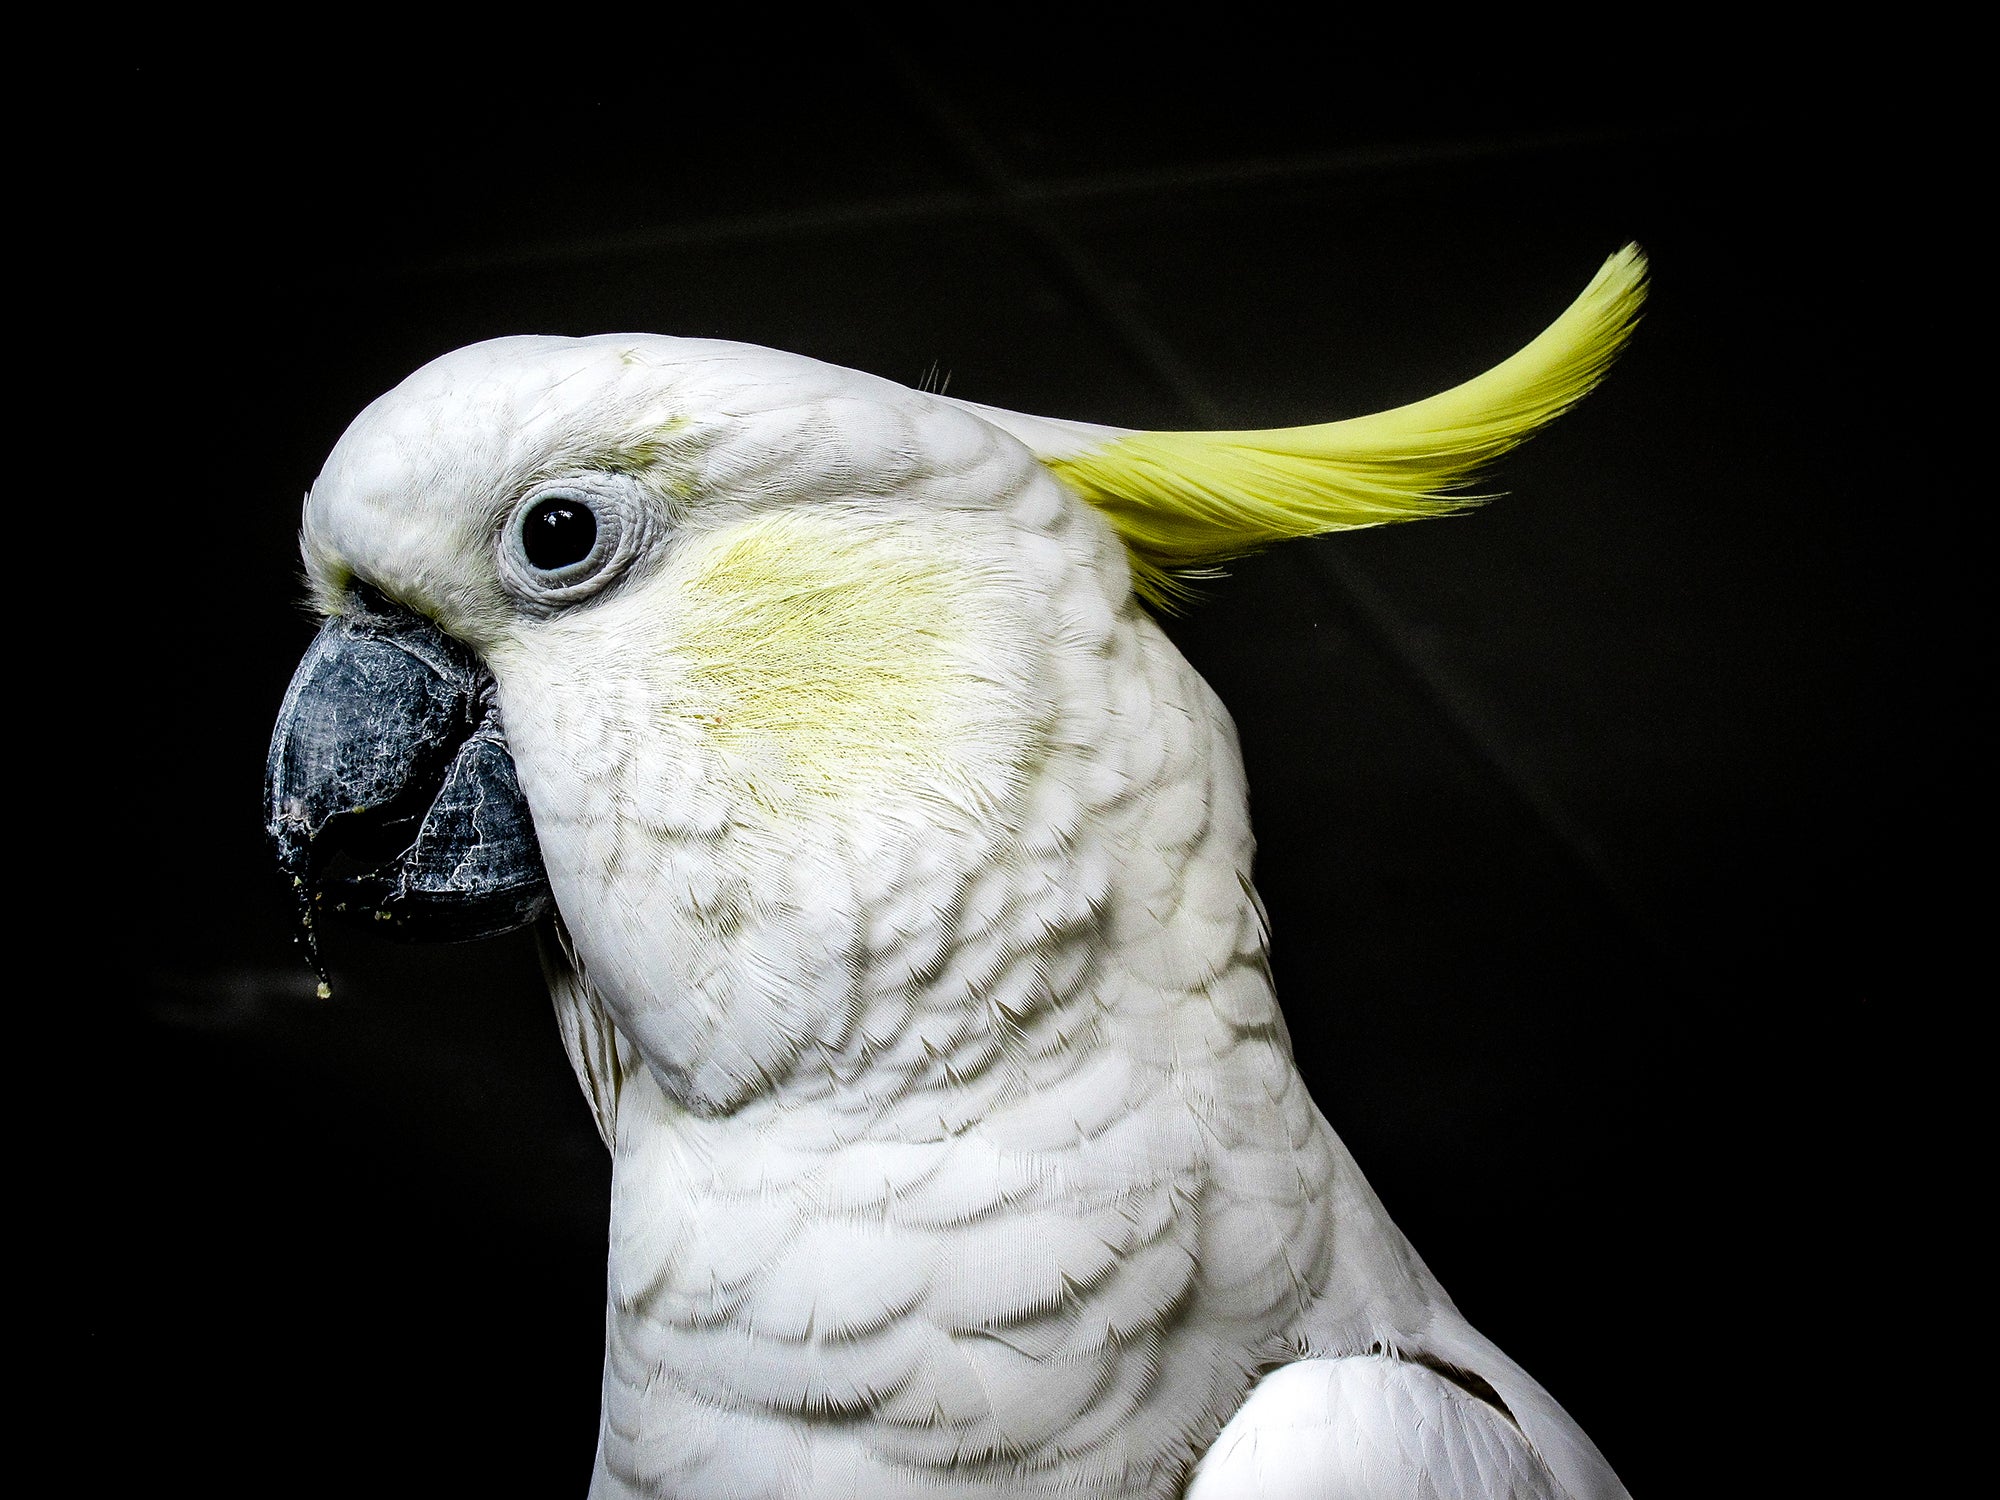 A white bird with yellow crest shown in front of a black backdrop.